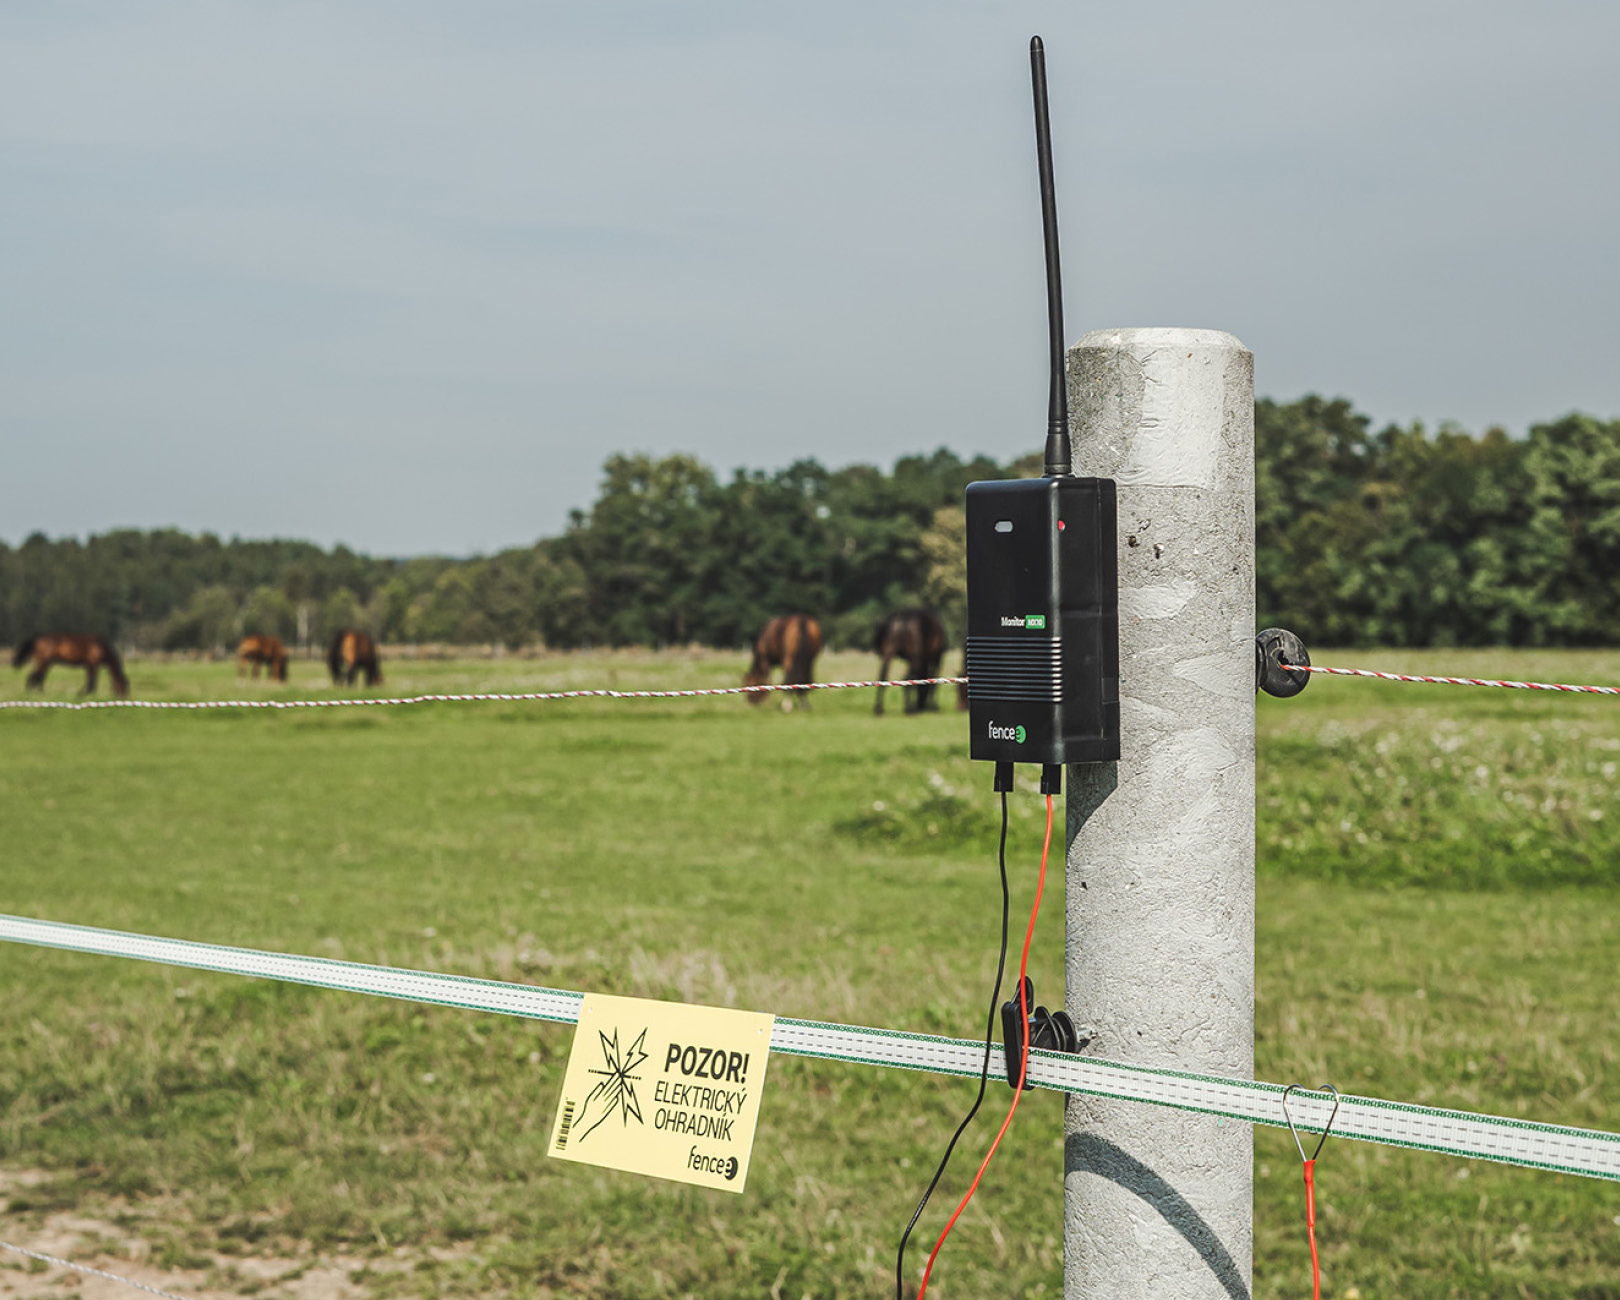 Control Monitor MX10 connected to the electric fence